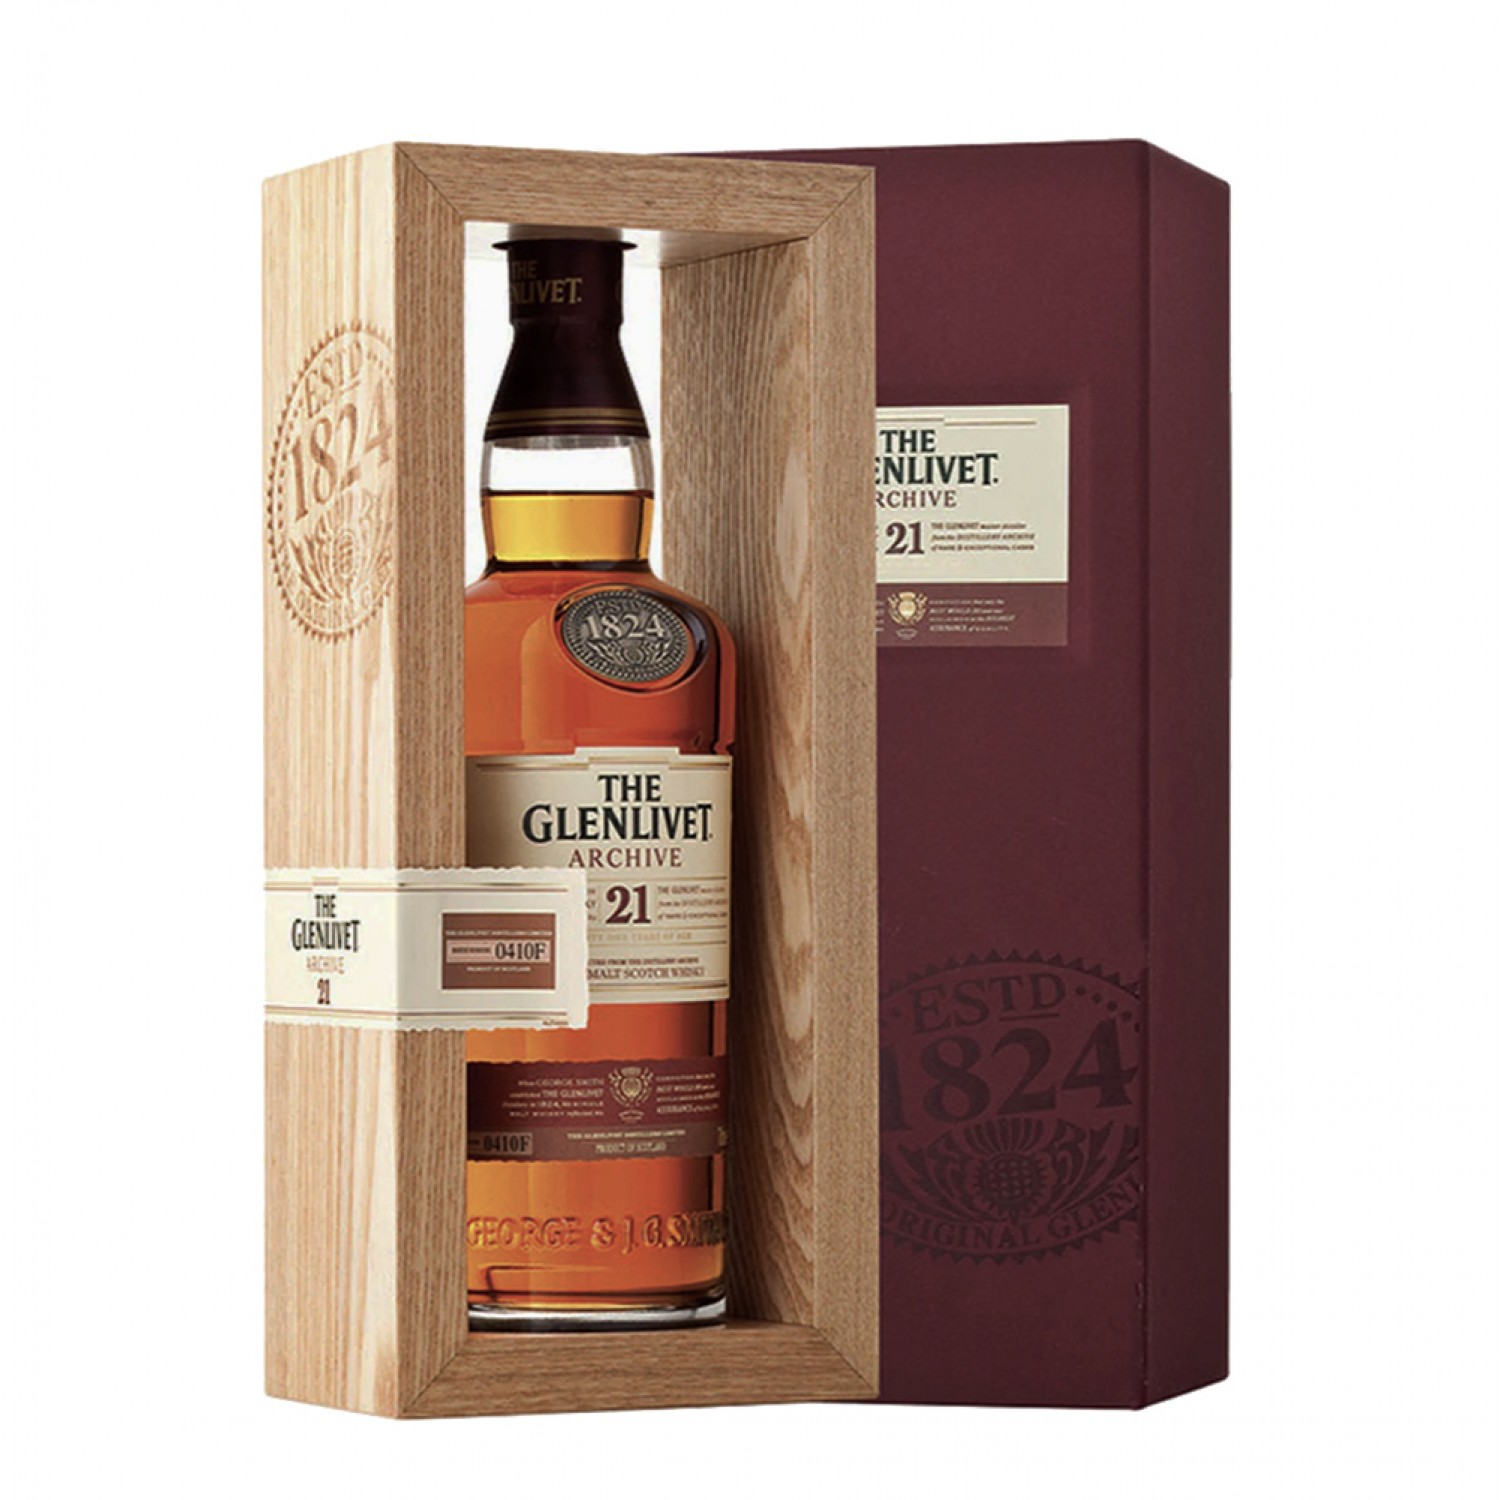 The Glenlivet 21 Years Old Archive Single Malt Scotch Whisky 700ml Wooden Box